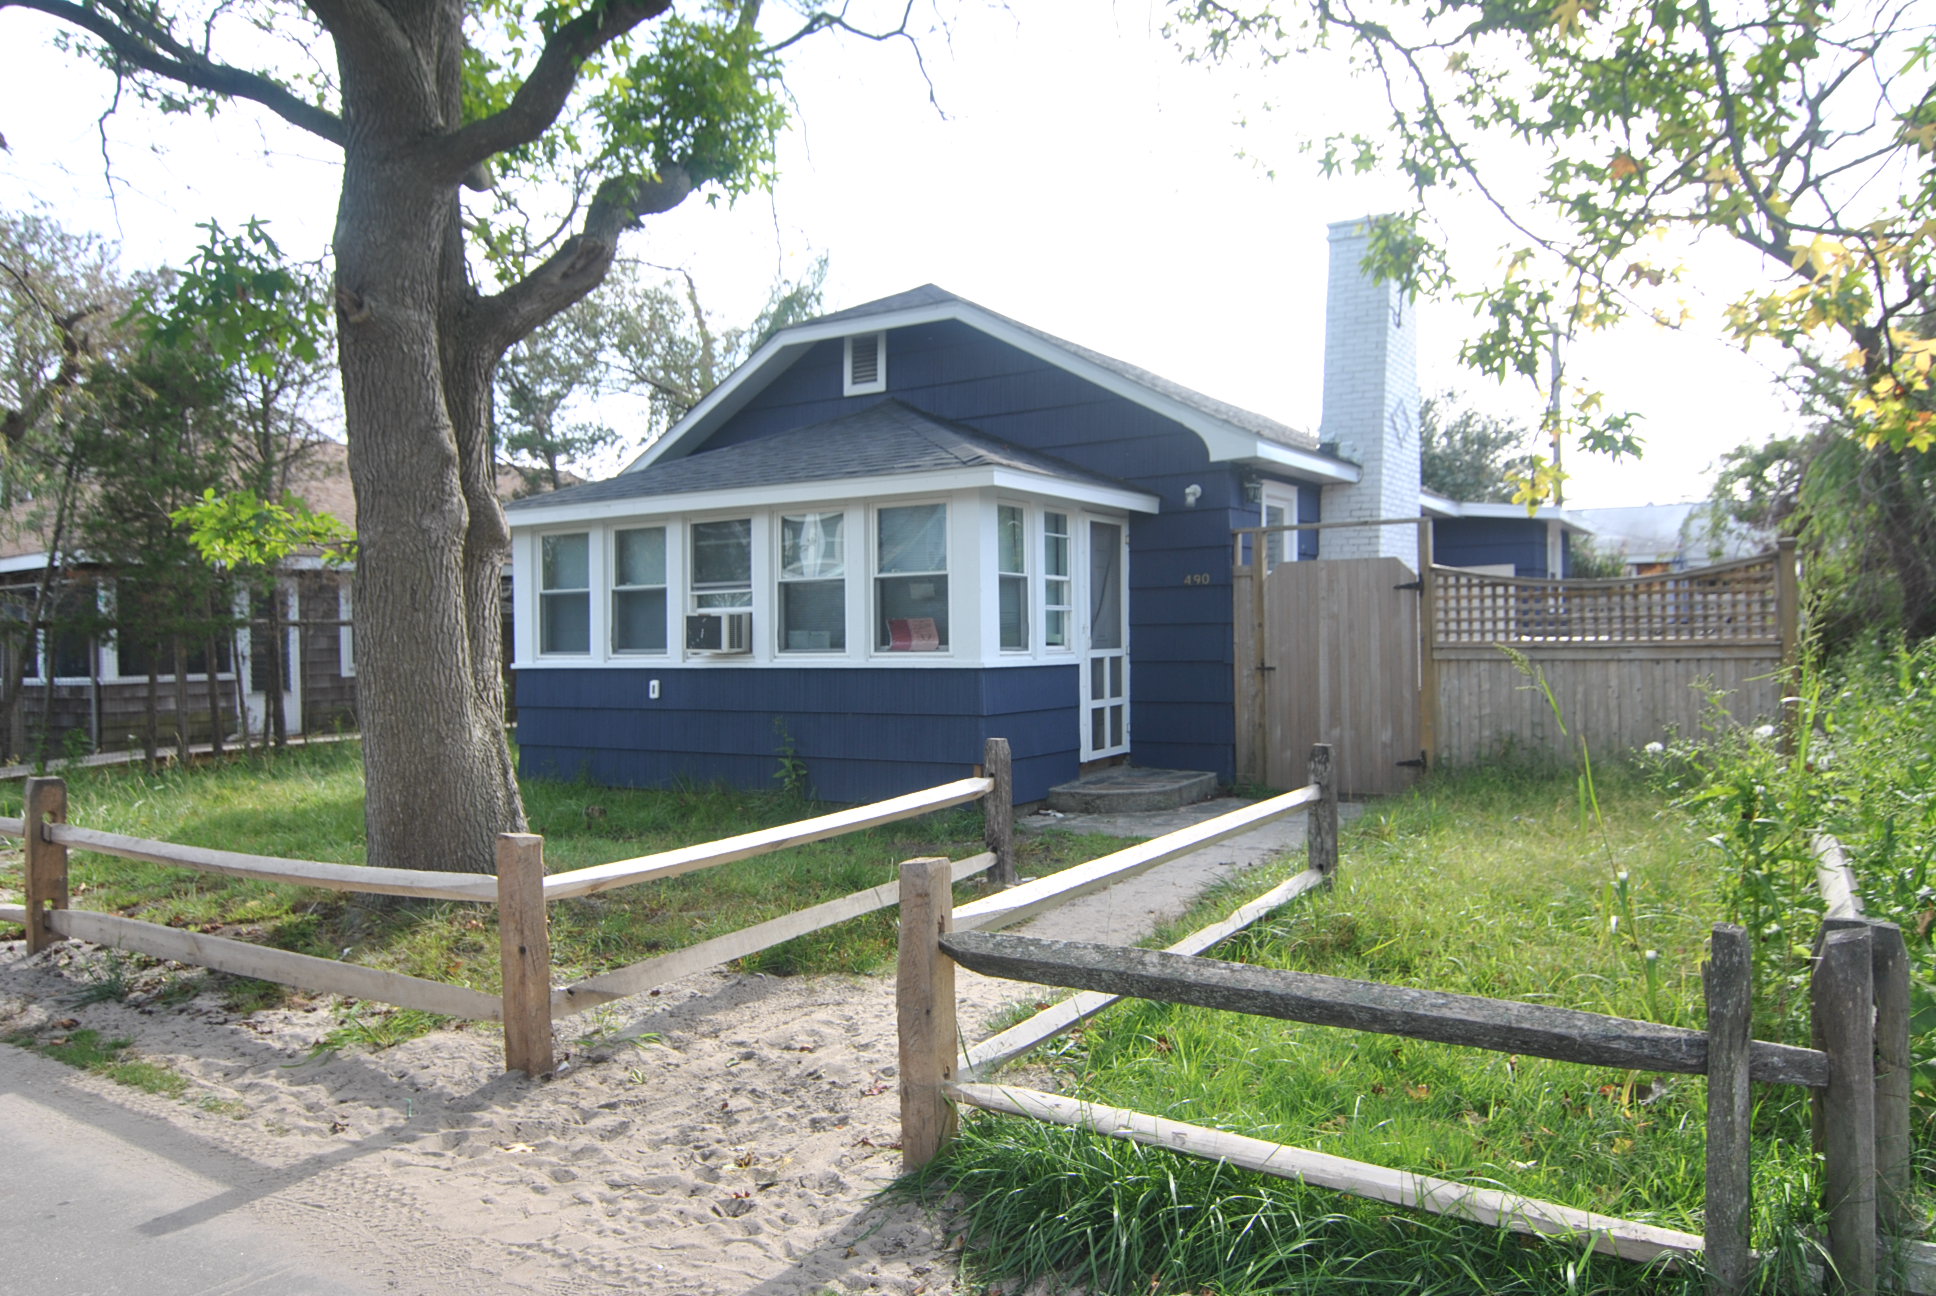 Completely renovated, one story home close to town and ferry.  Fireplace, front porch, sundeck.  